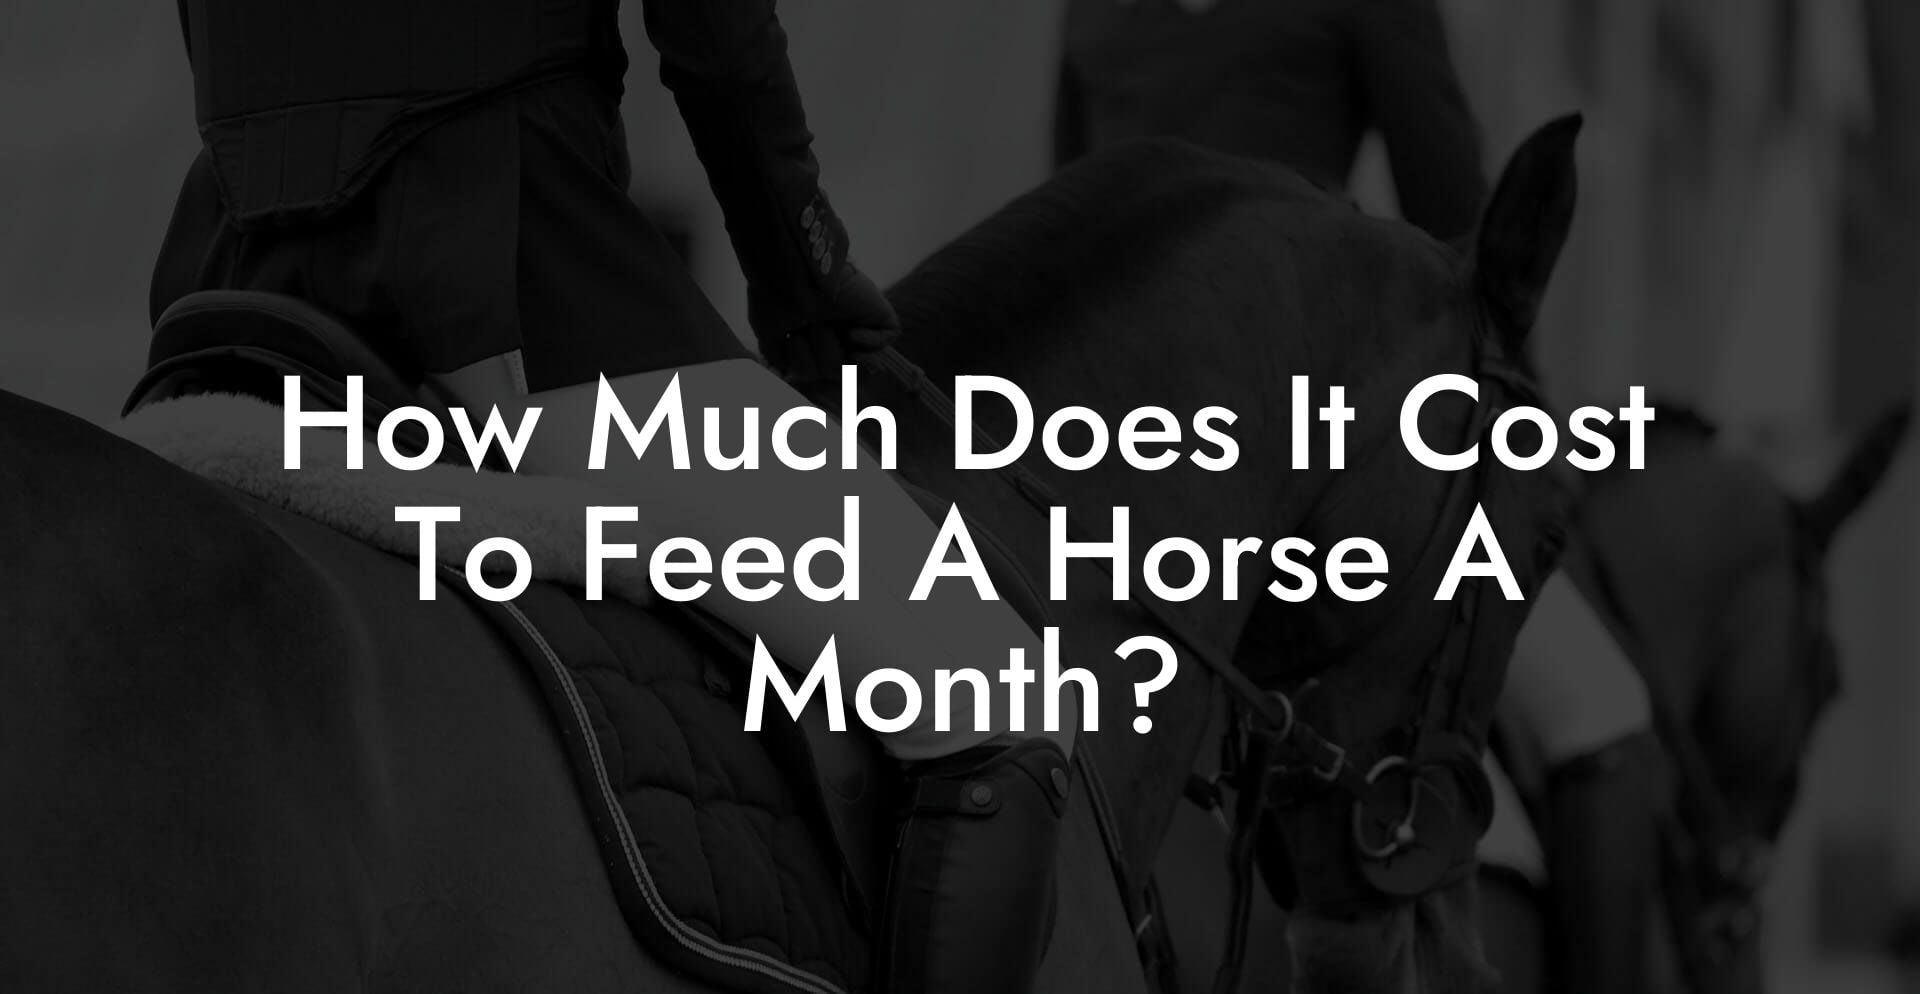 How Much Does It Cost To Feed A Horse A Month?